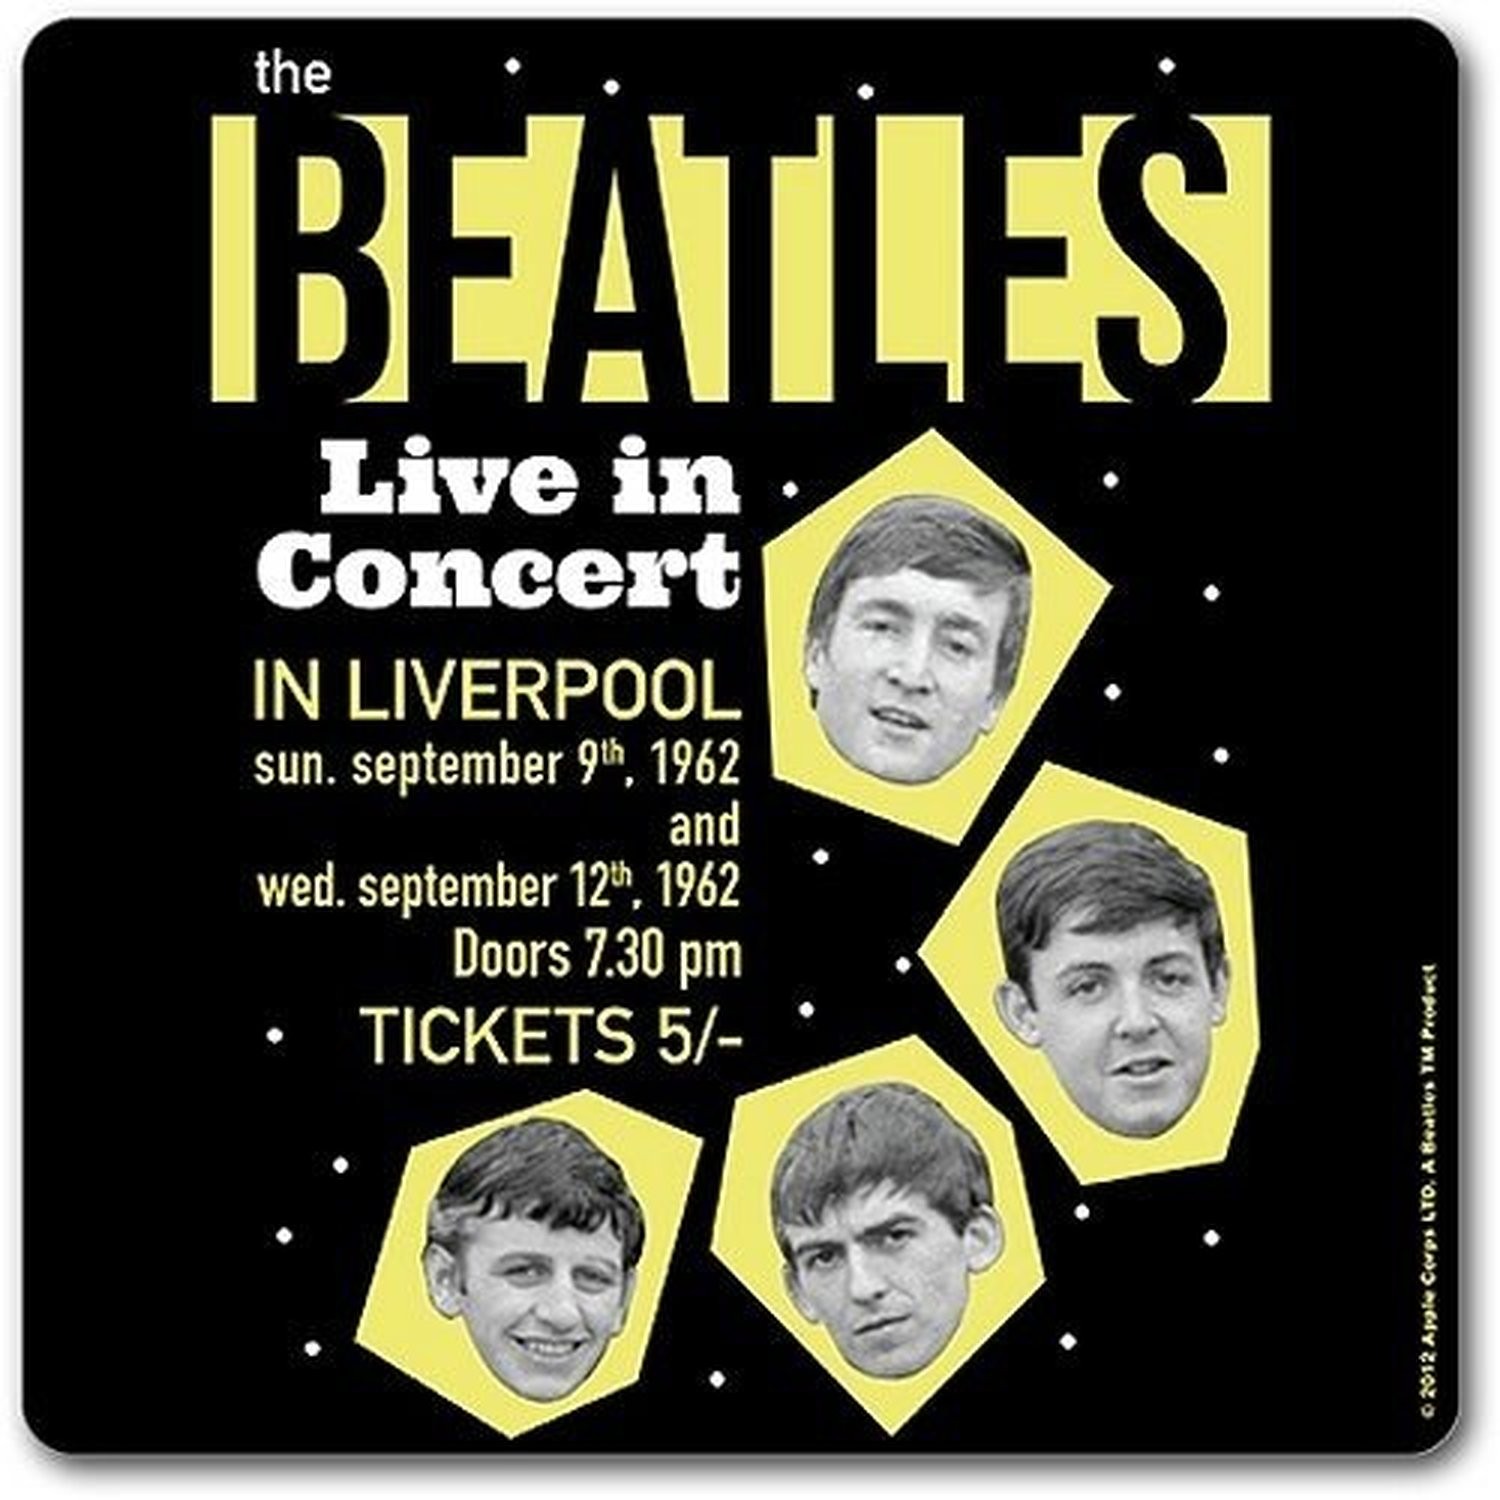 The Beatles Live In Concert Liverpool Single Drinks Coaster Gift Band Album Fan